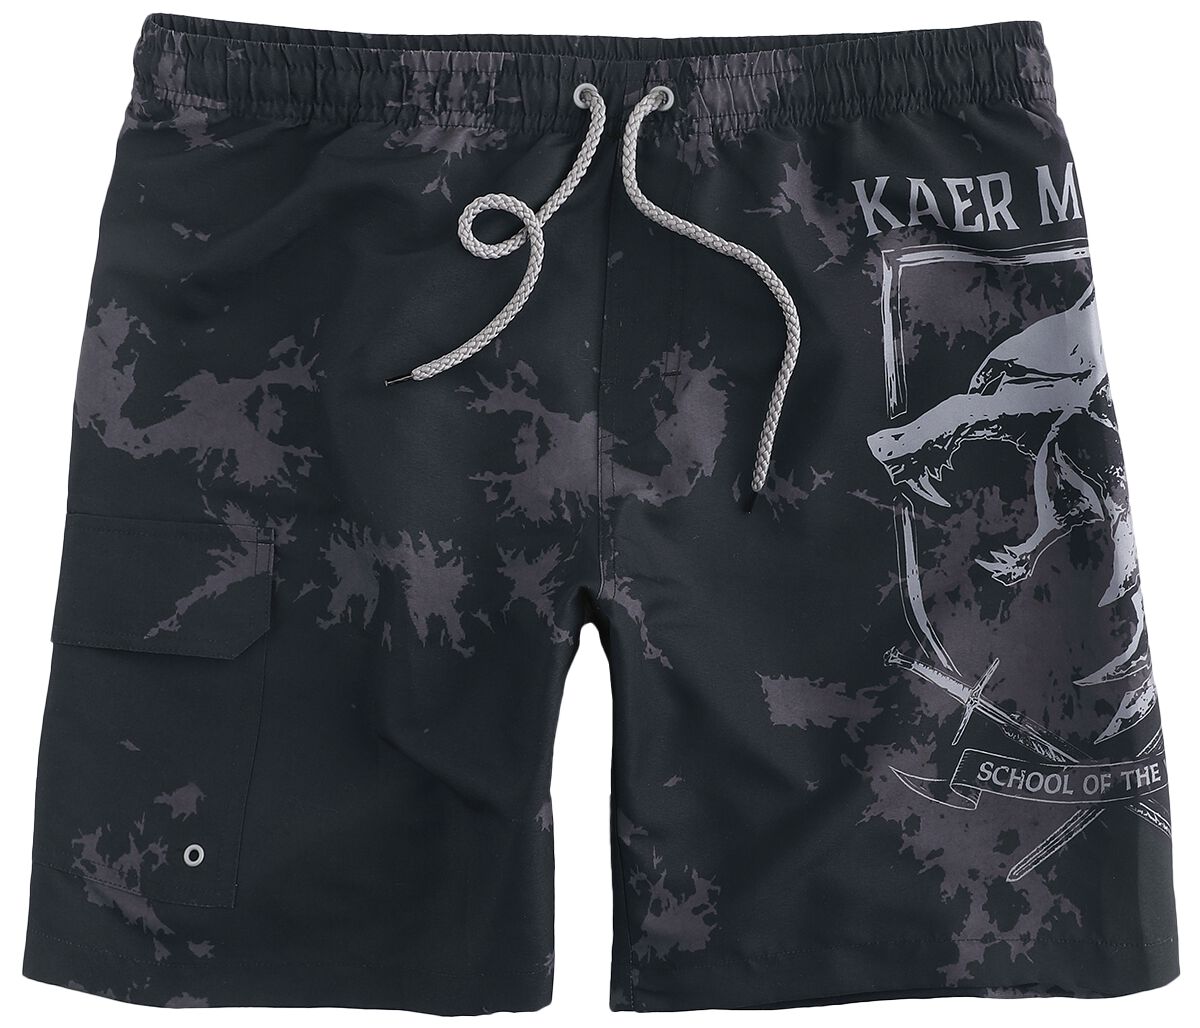 The Witcher The Witcher Badeshort multicolor in S